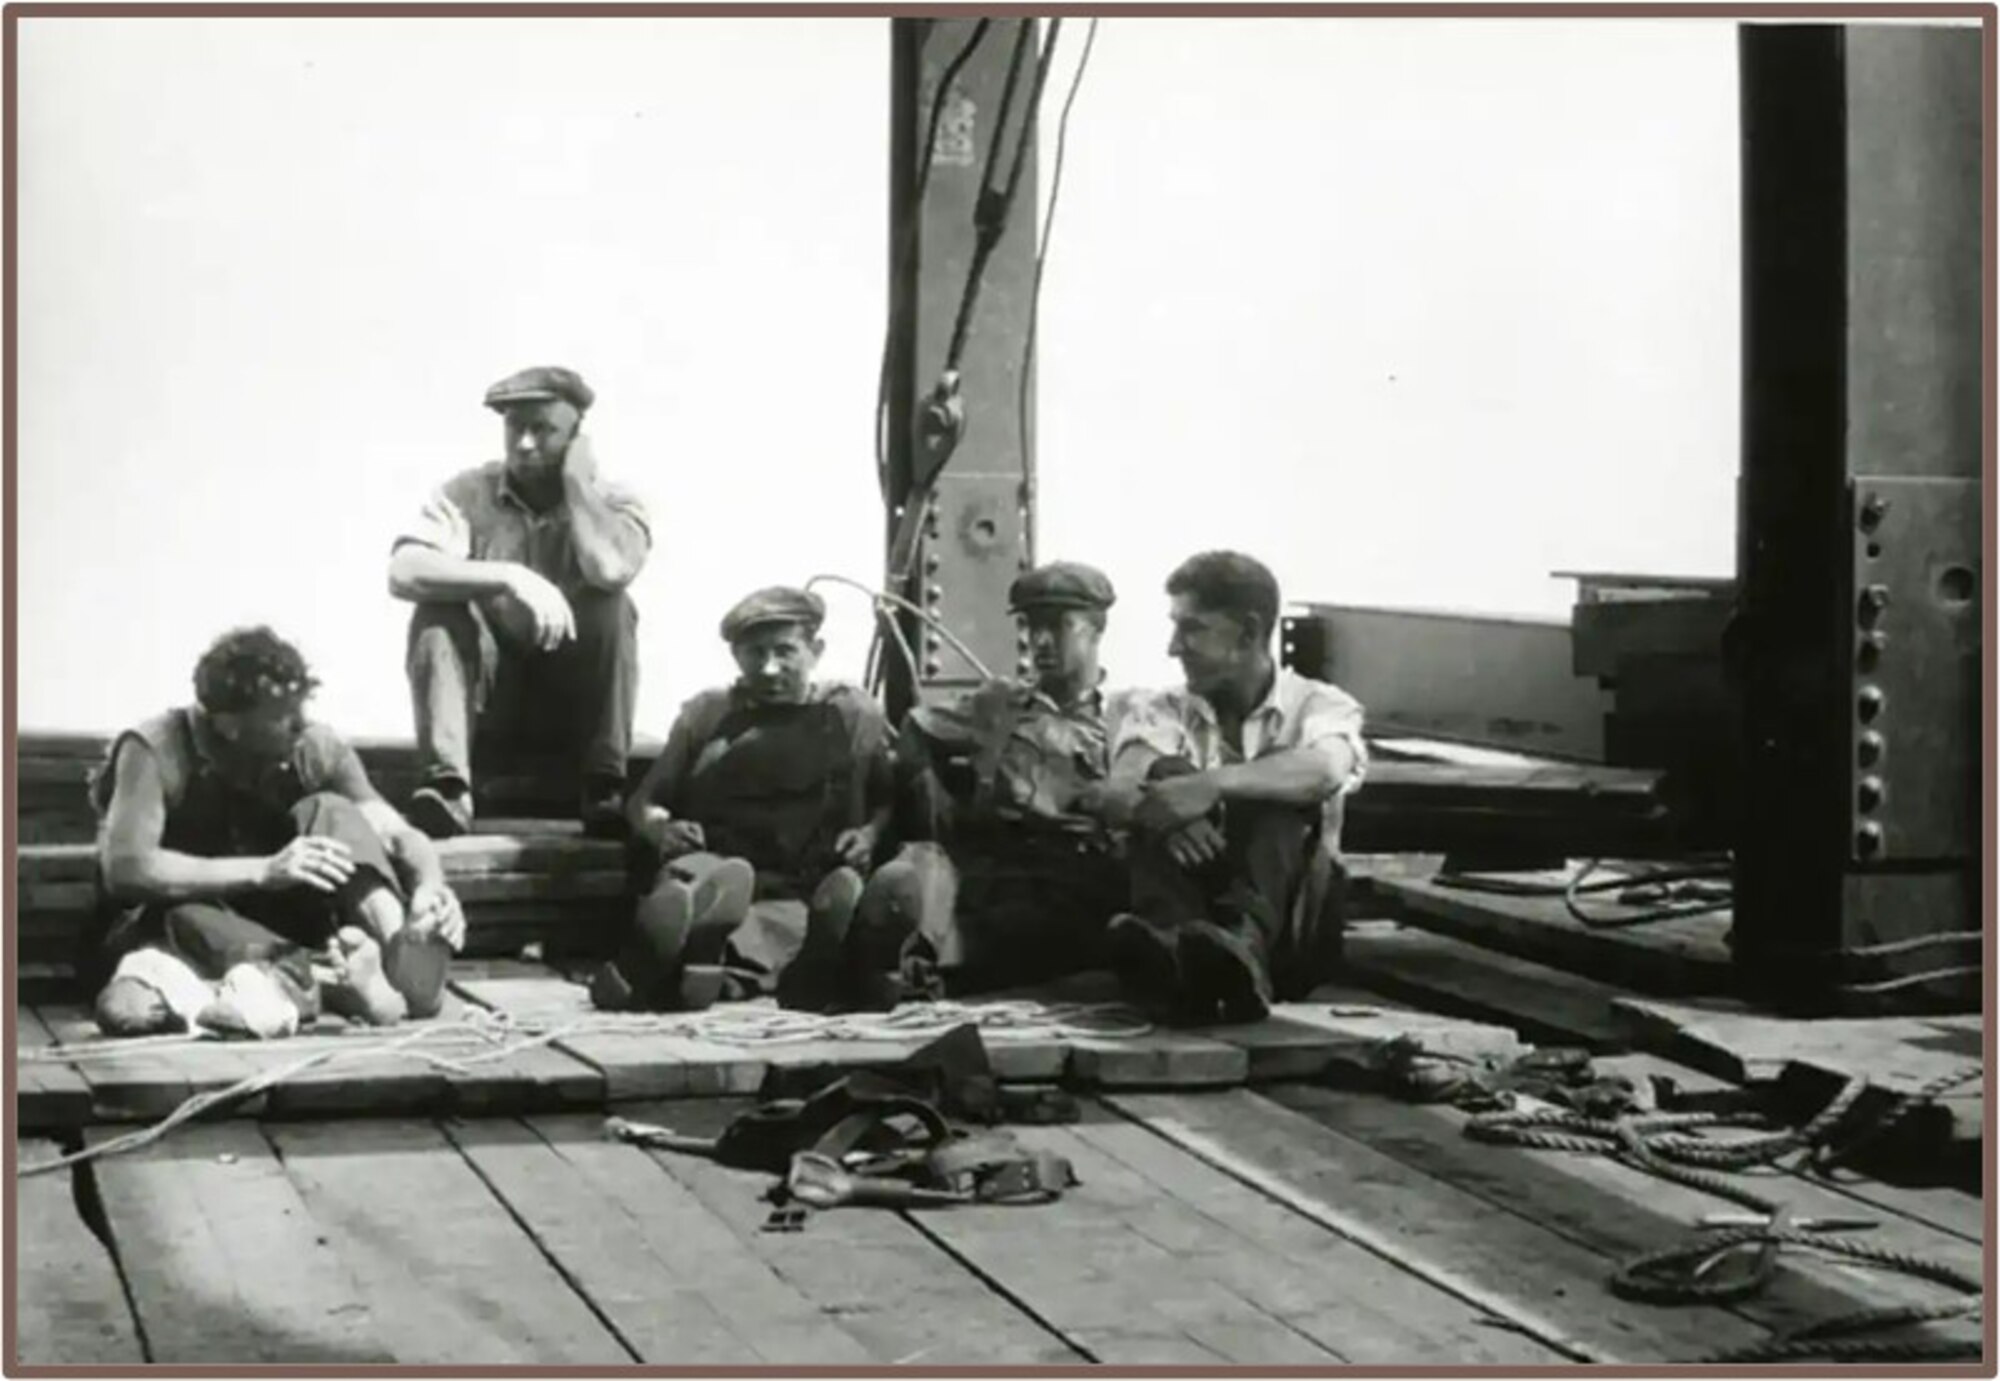 Black and white photo of five men sitting on the floor of a construction site